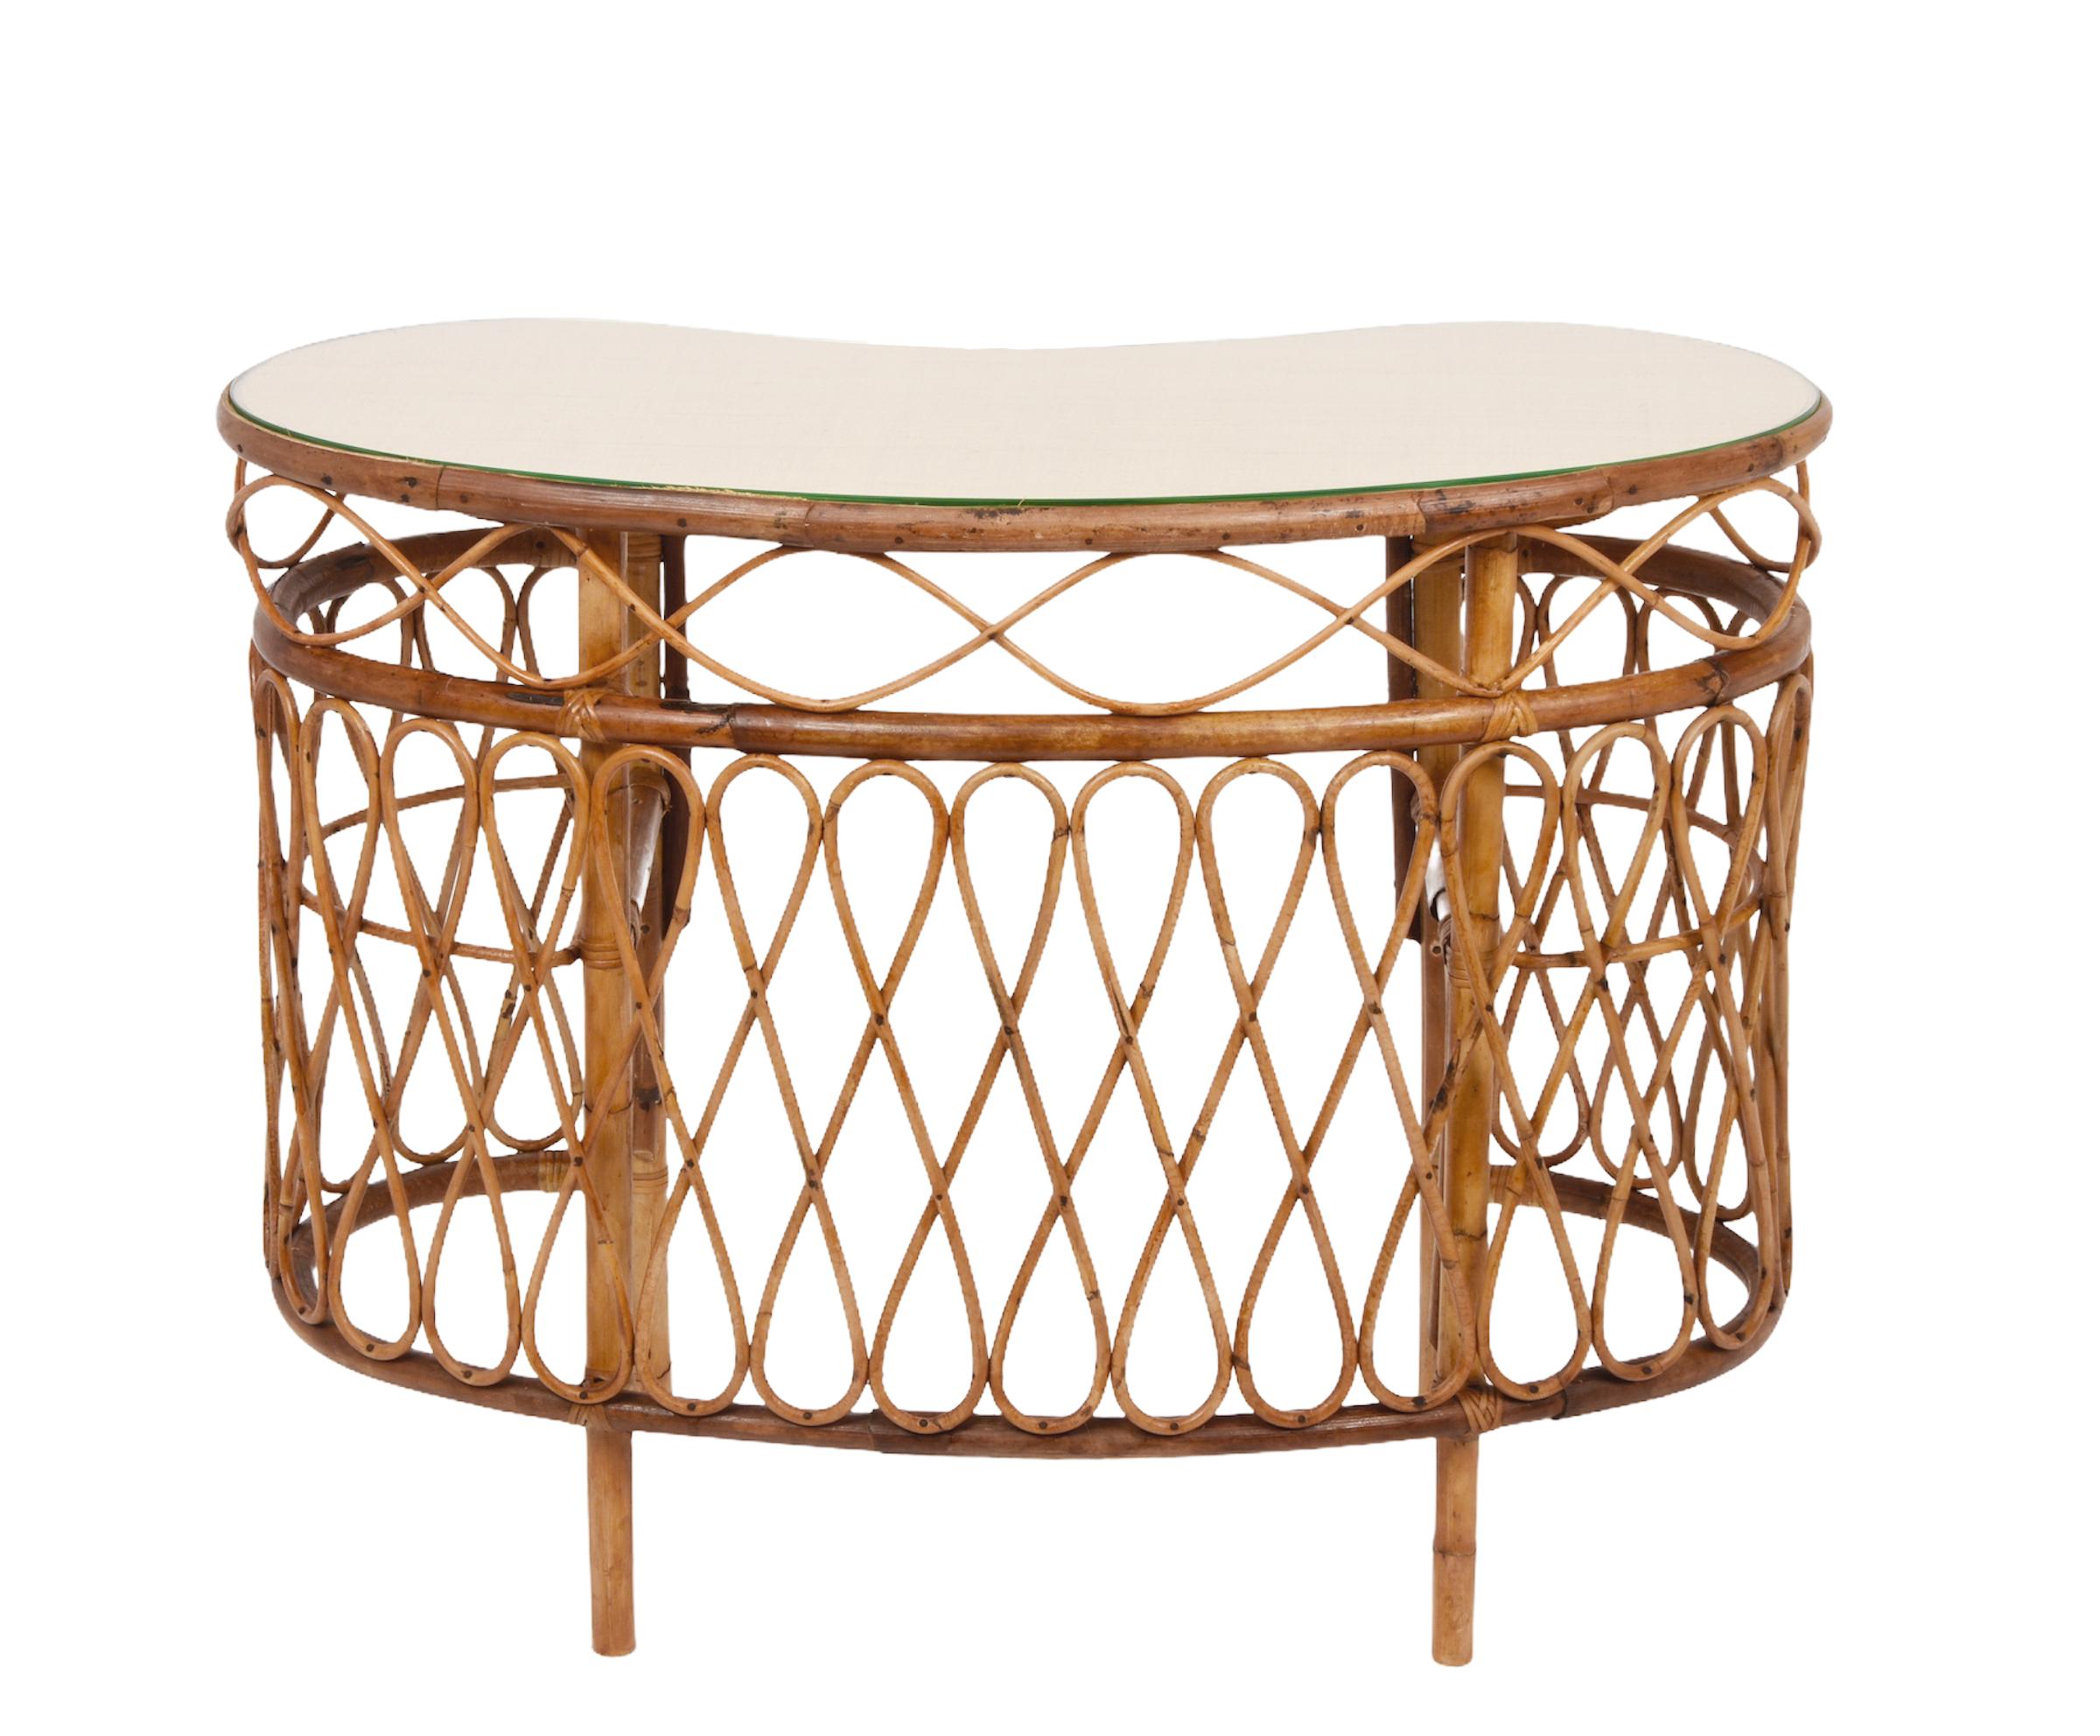 20th Century Midcentury Bamboo Wicker and Glass Cocktail Console Table after Albini, 1970s